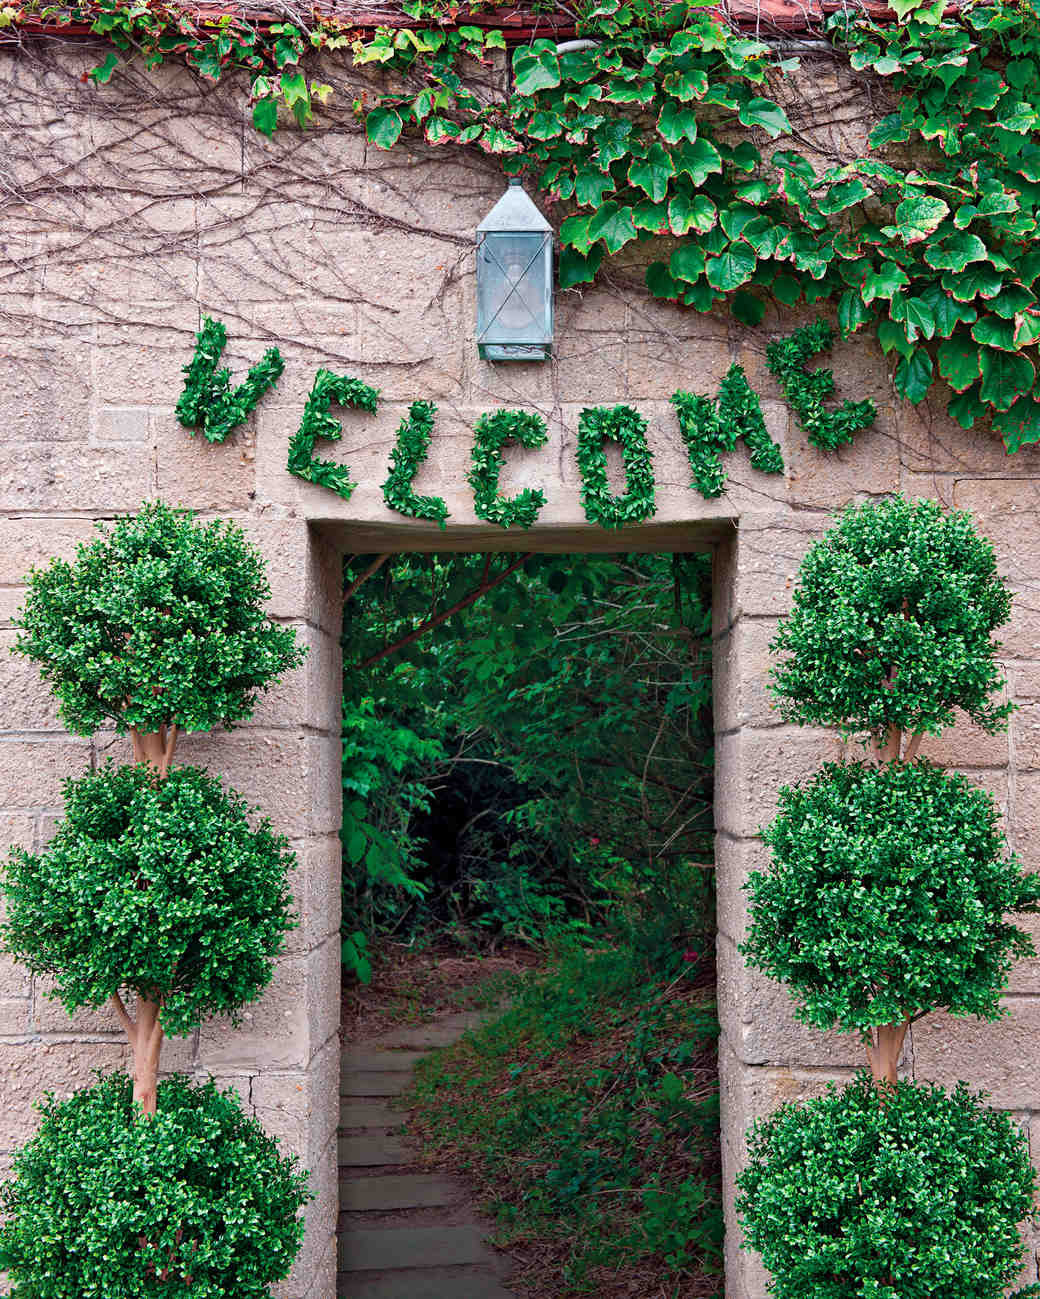 Outside Wedding Decorations
 Outdoor Wedding Decorations That Are Easy to DIY